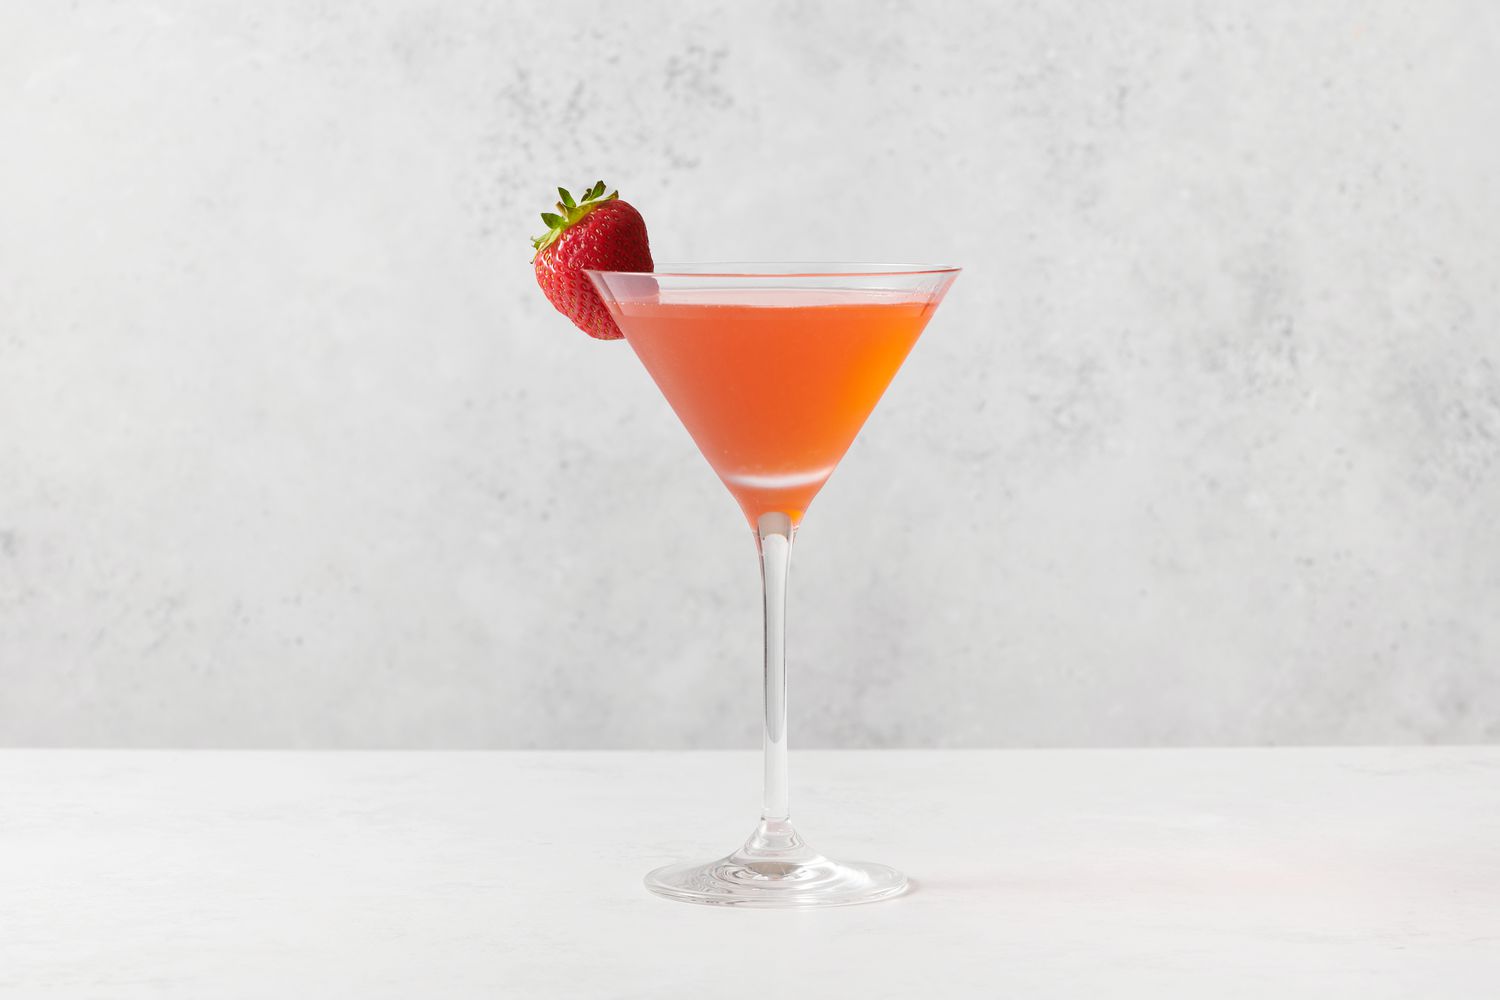 A strawberry martini garnished with a whole strawberry